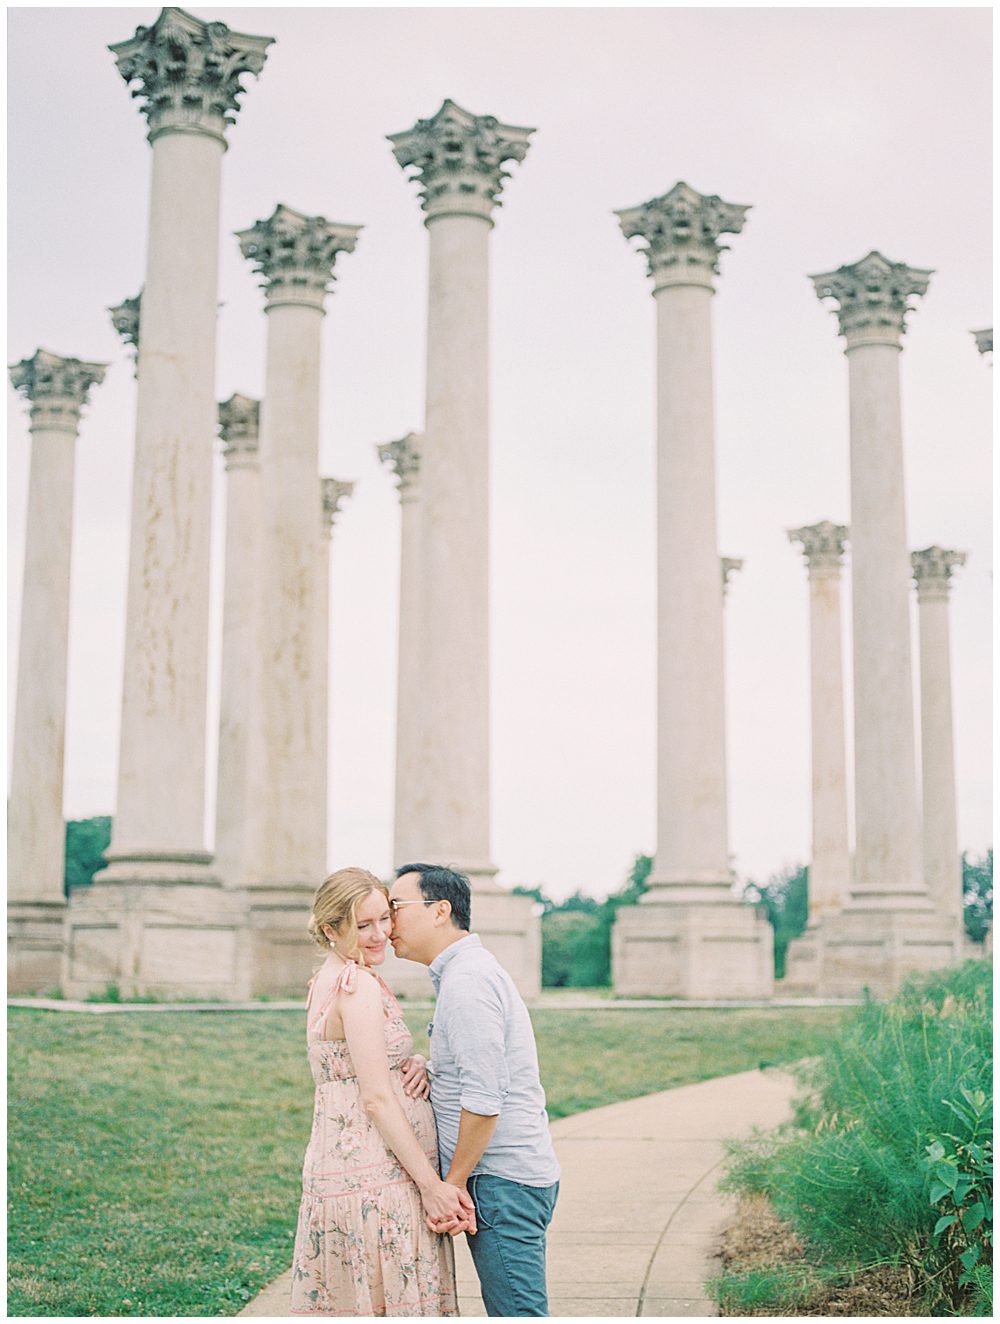 Husband leans over to kiss his wife's cheek during their National Arboretum maternity session.